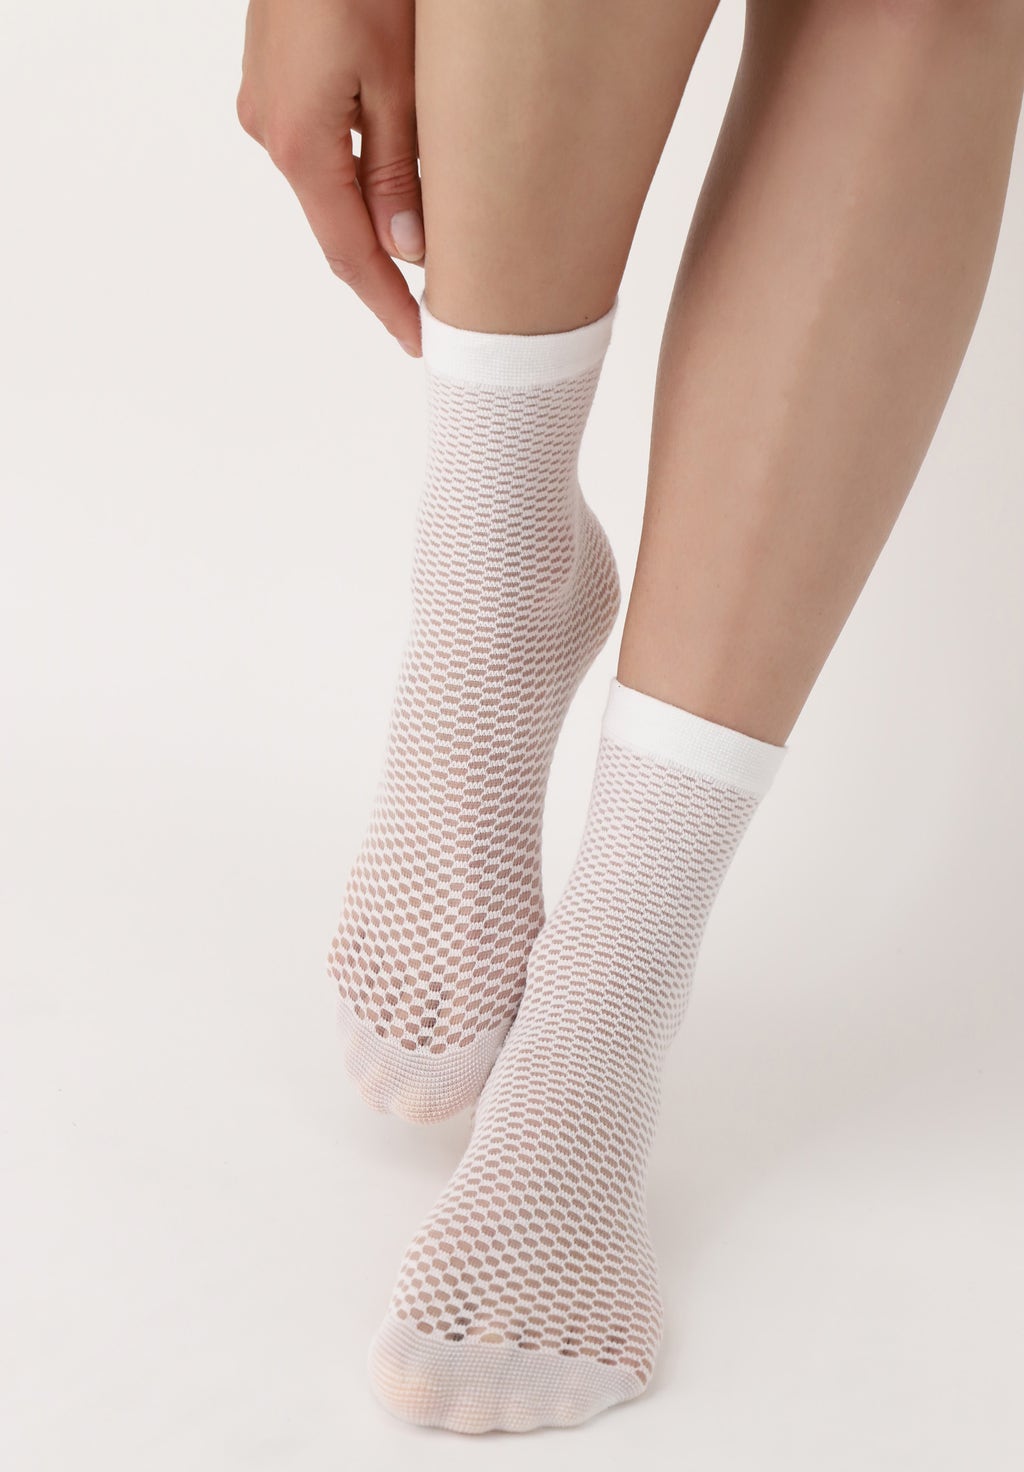 OroblÌ_ Twin Net Sock - White cotton mix quarter high ankle tube socks twin pack with an enclosed fishnet style pattern, plain toe and thin cuff.